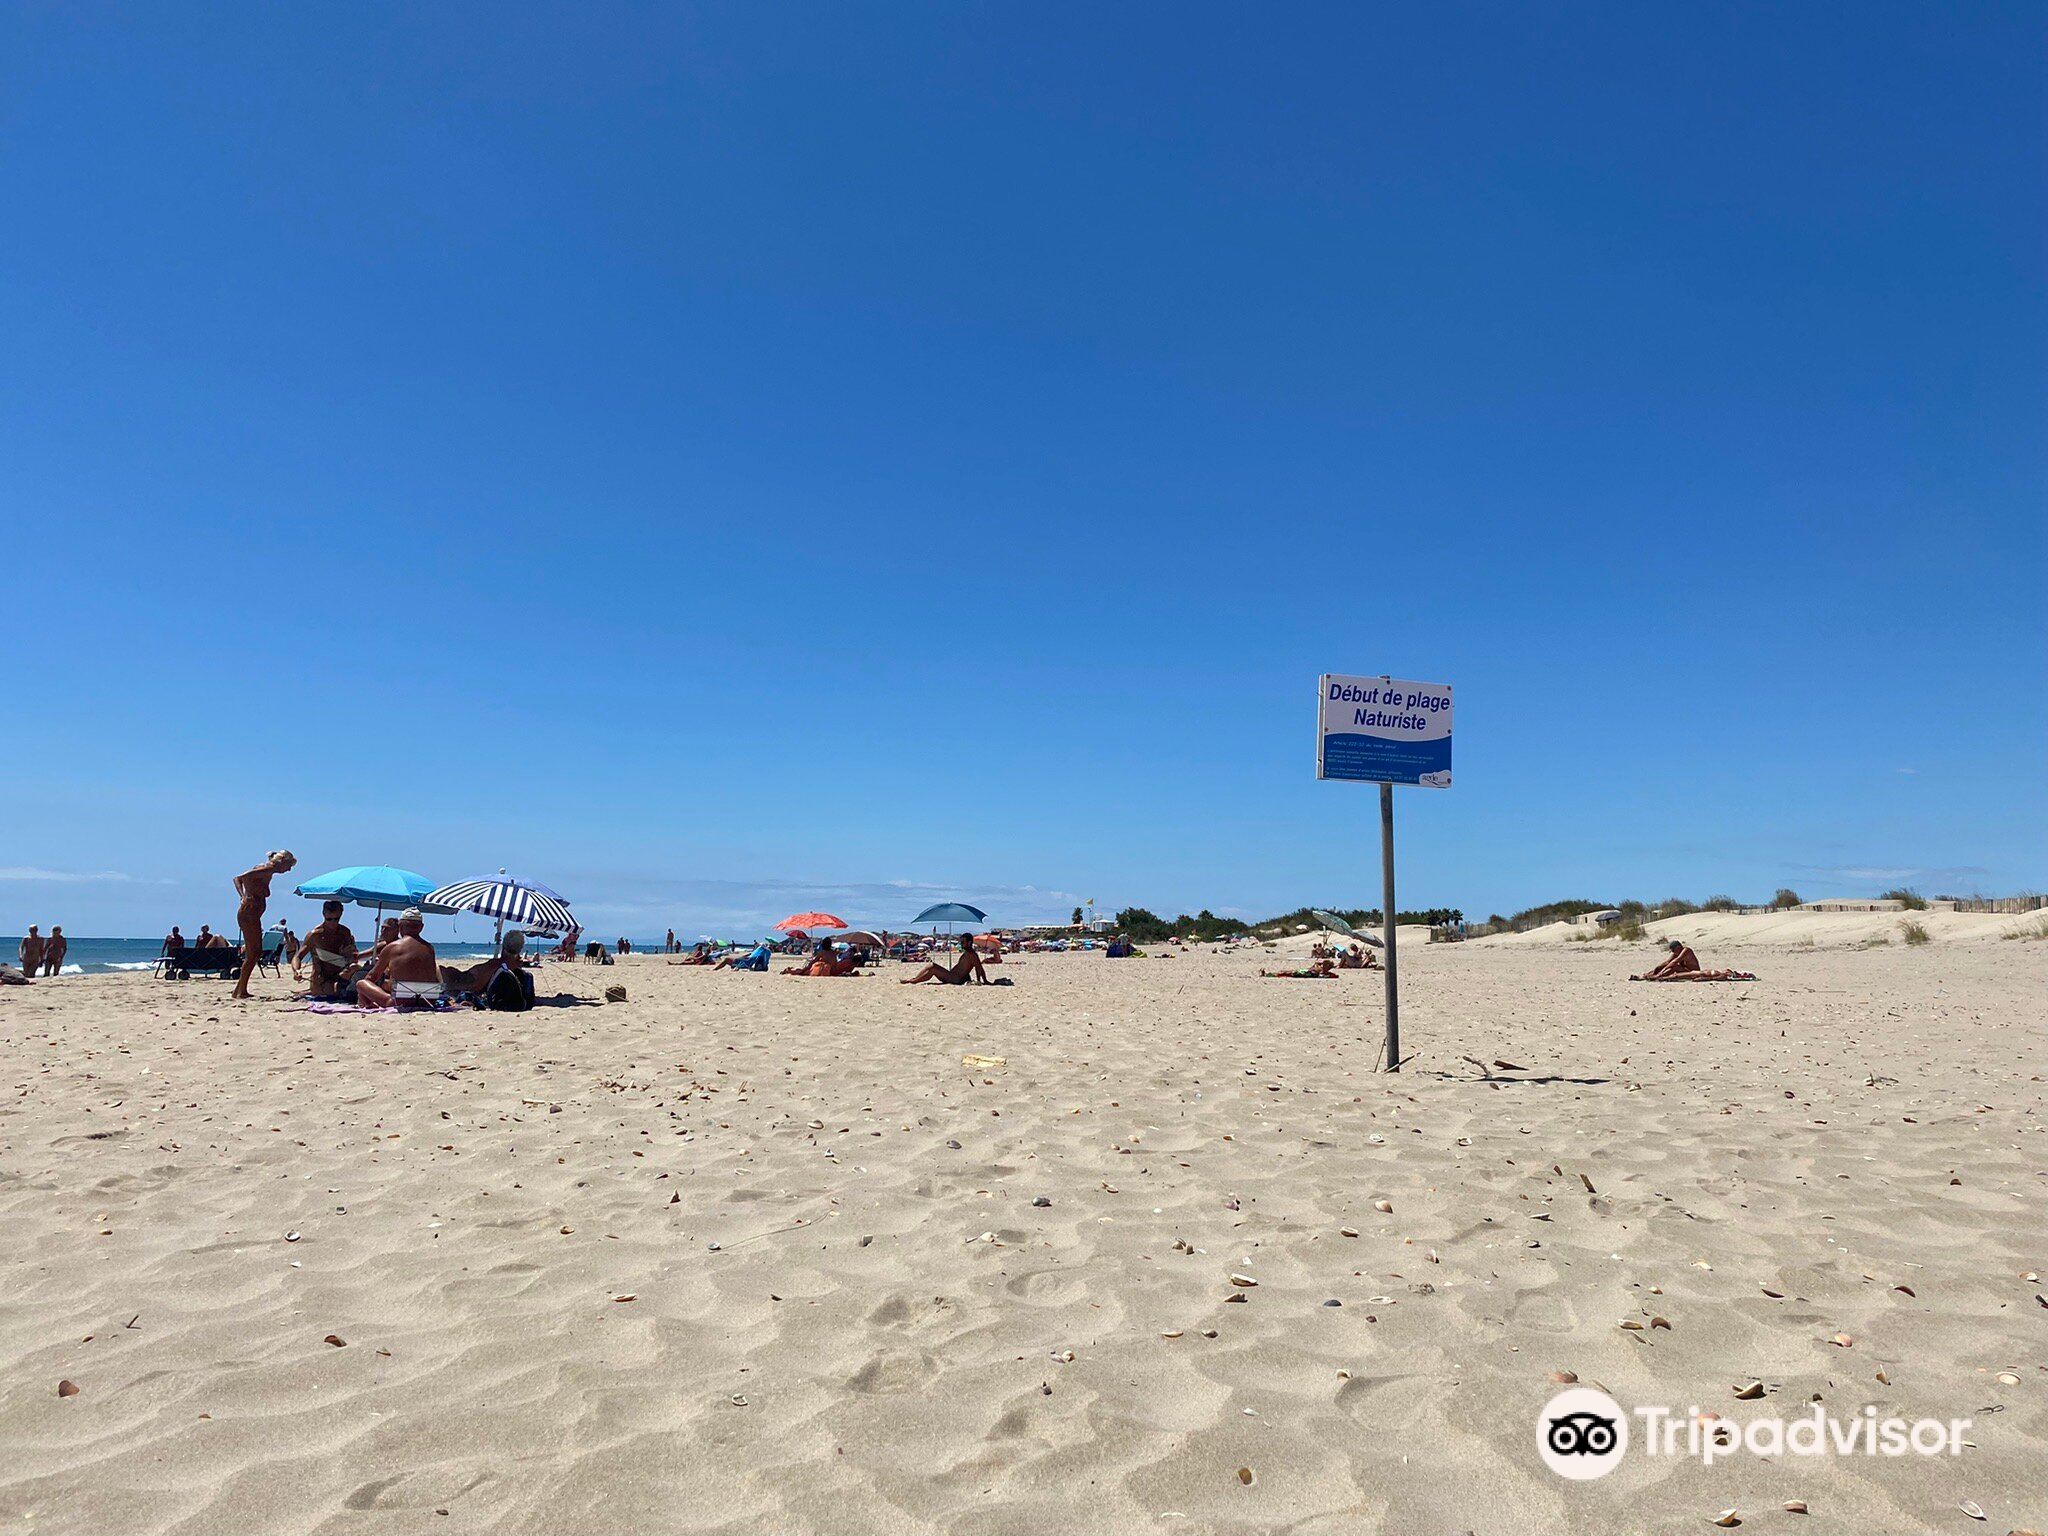 Latest travel itineraries for Plage Naturiste in September (updated in 2023), Plage Naturiste reviews, Plage Naturiste address and opening hours, popular attractions, hotels, and restaurants near Plage Naturiste